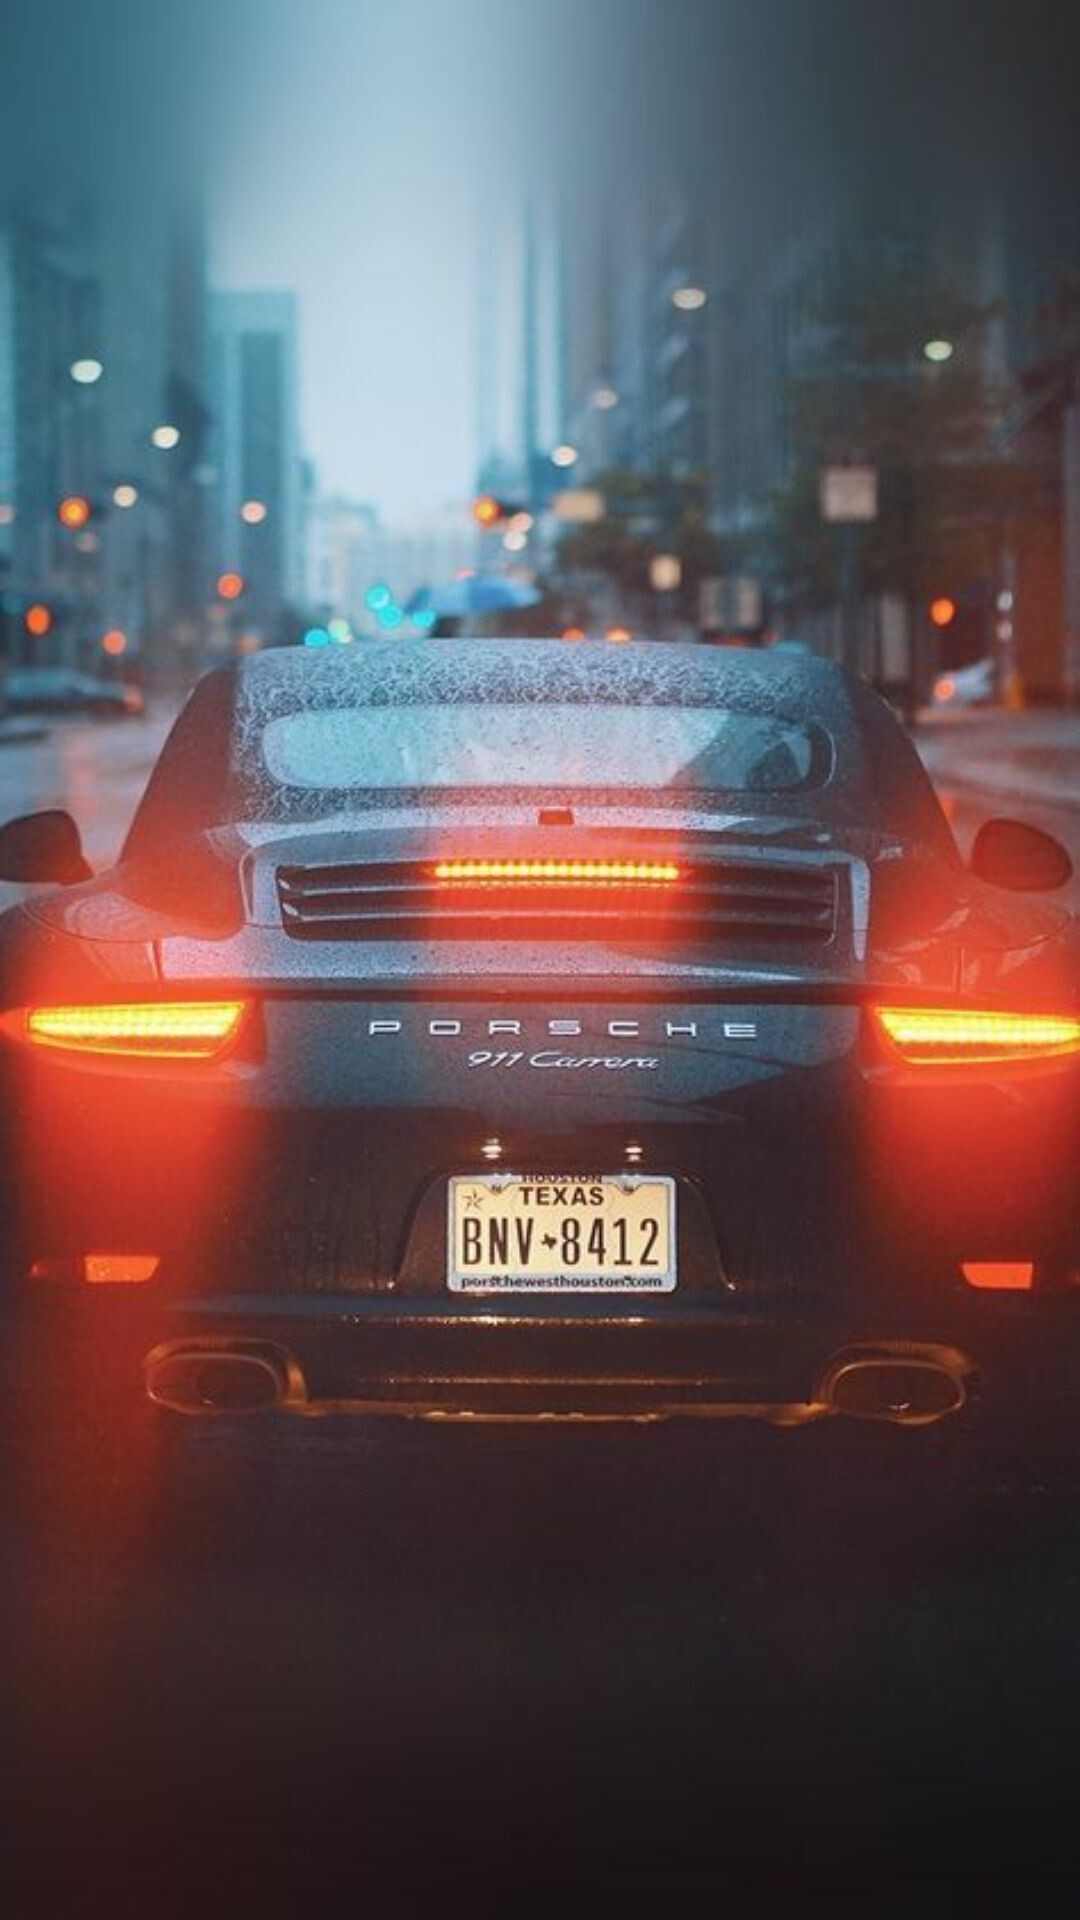 Porsche: One of the top players in the luxury car game, Vehicle, Automotive tail and brake light. 1080x1920 Full HD Wallpaper.